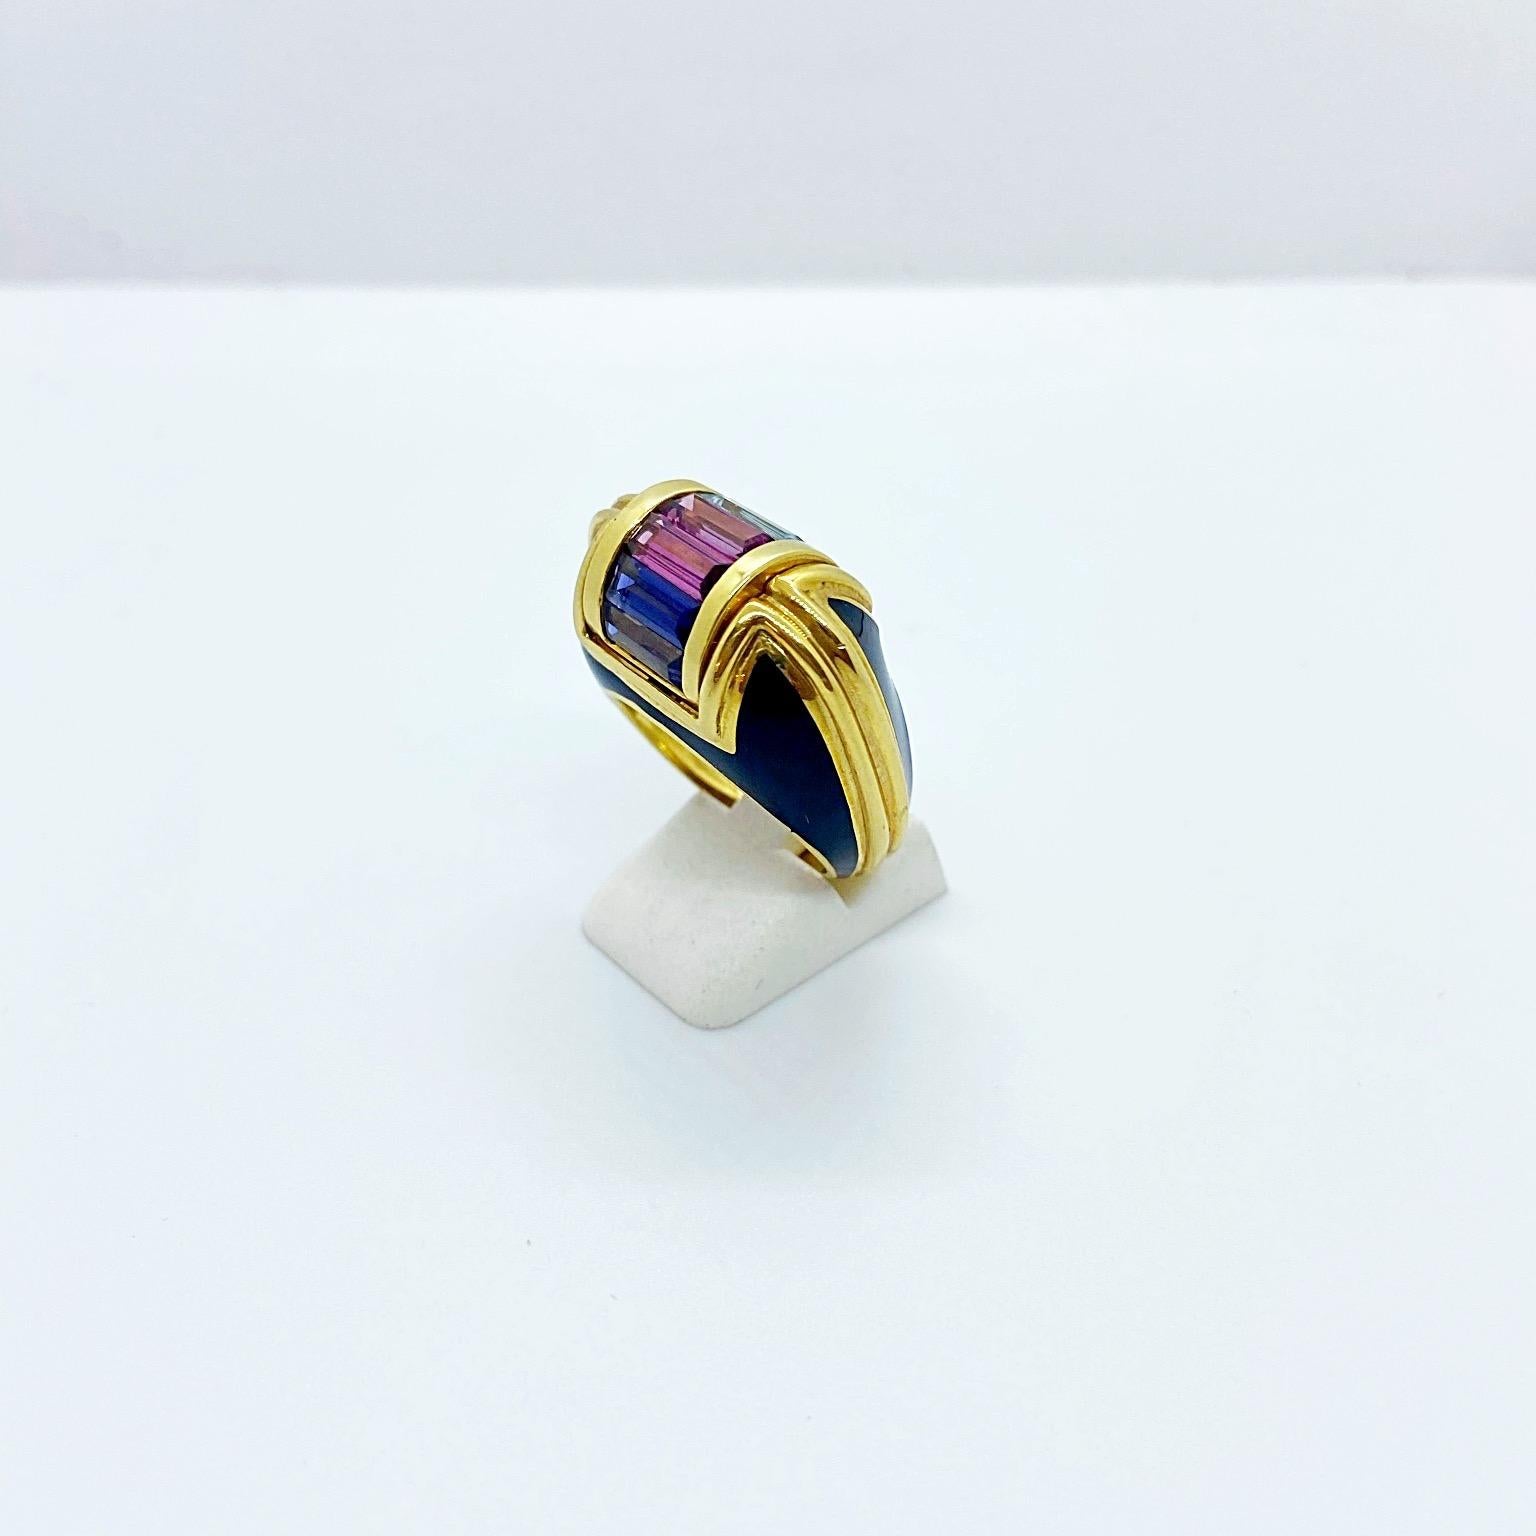 This magnificent  18 karat yellow gold ring is designed by the world renowned Italian company La Nouvelle Bague. They are known for their exquisite enamel work,  and their unique signature style marrying the classic with the modern.
The dome shaped